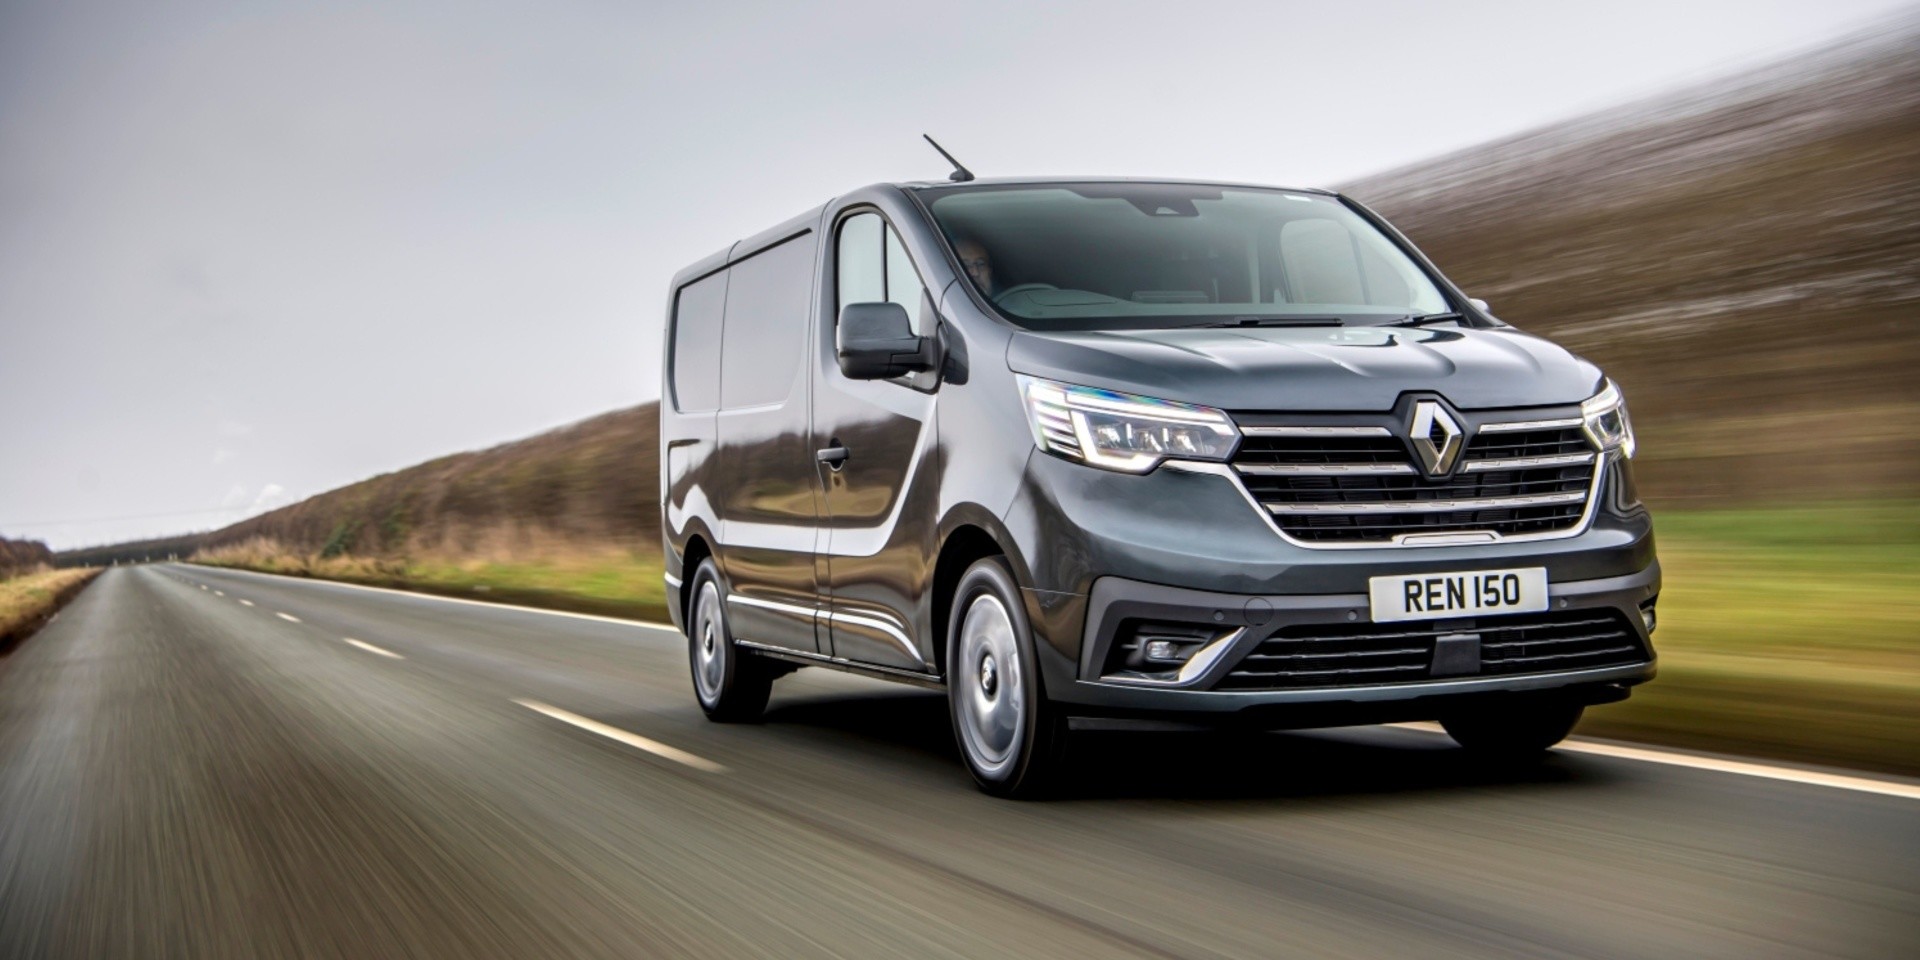 driving renault trafic to test its fuel economy